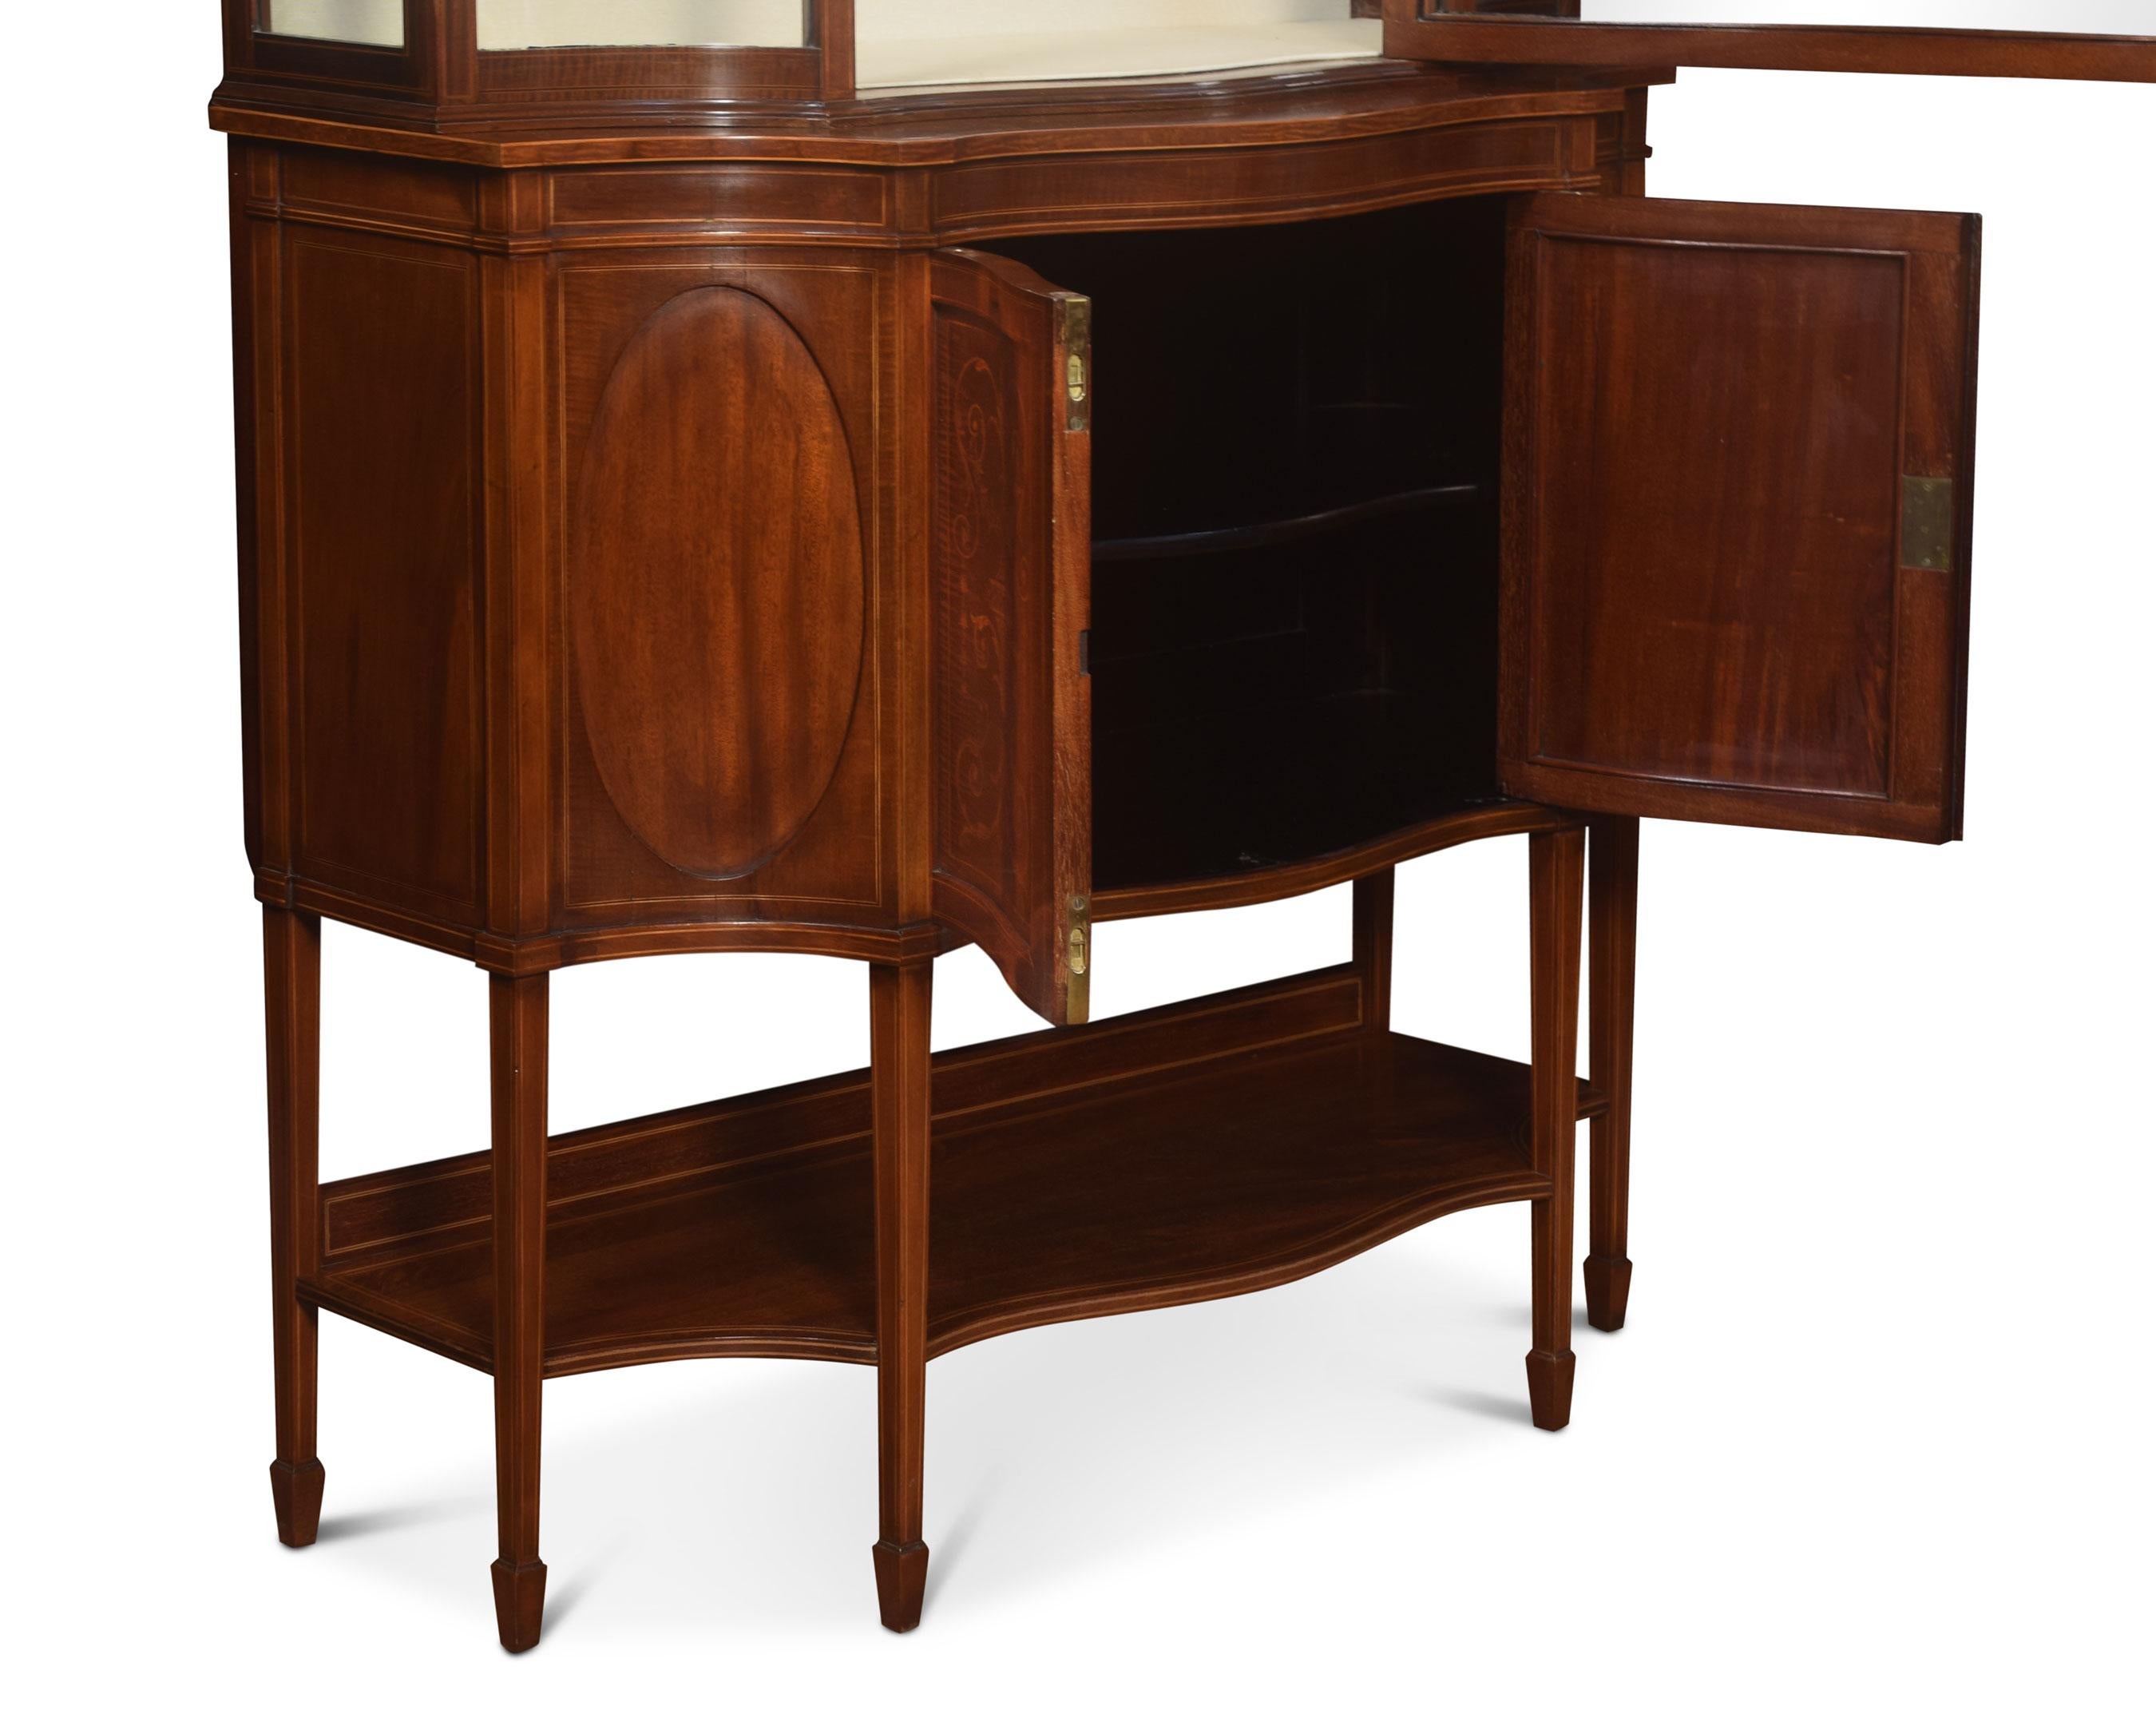  Mahogany Inlaid Serpentine Fronted Display Cabinet In Good Condition For Sale In Cheshire, GB